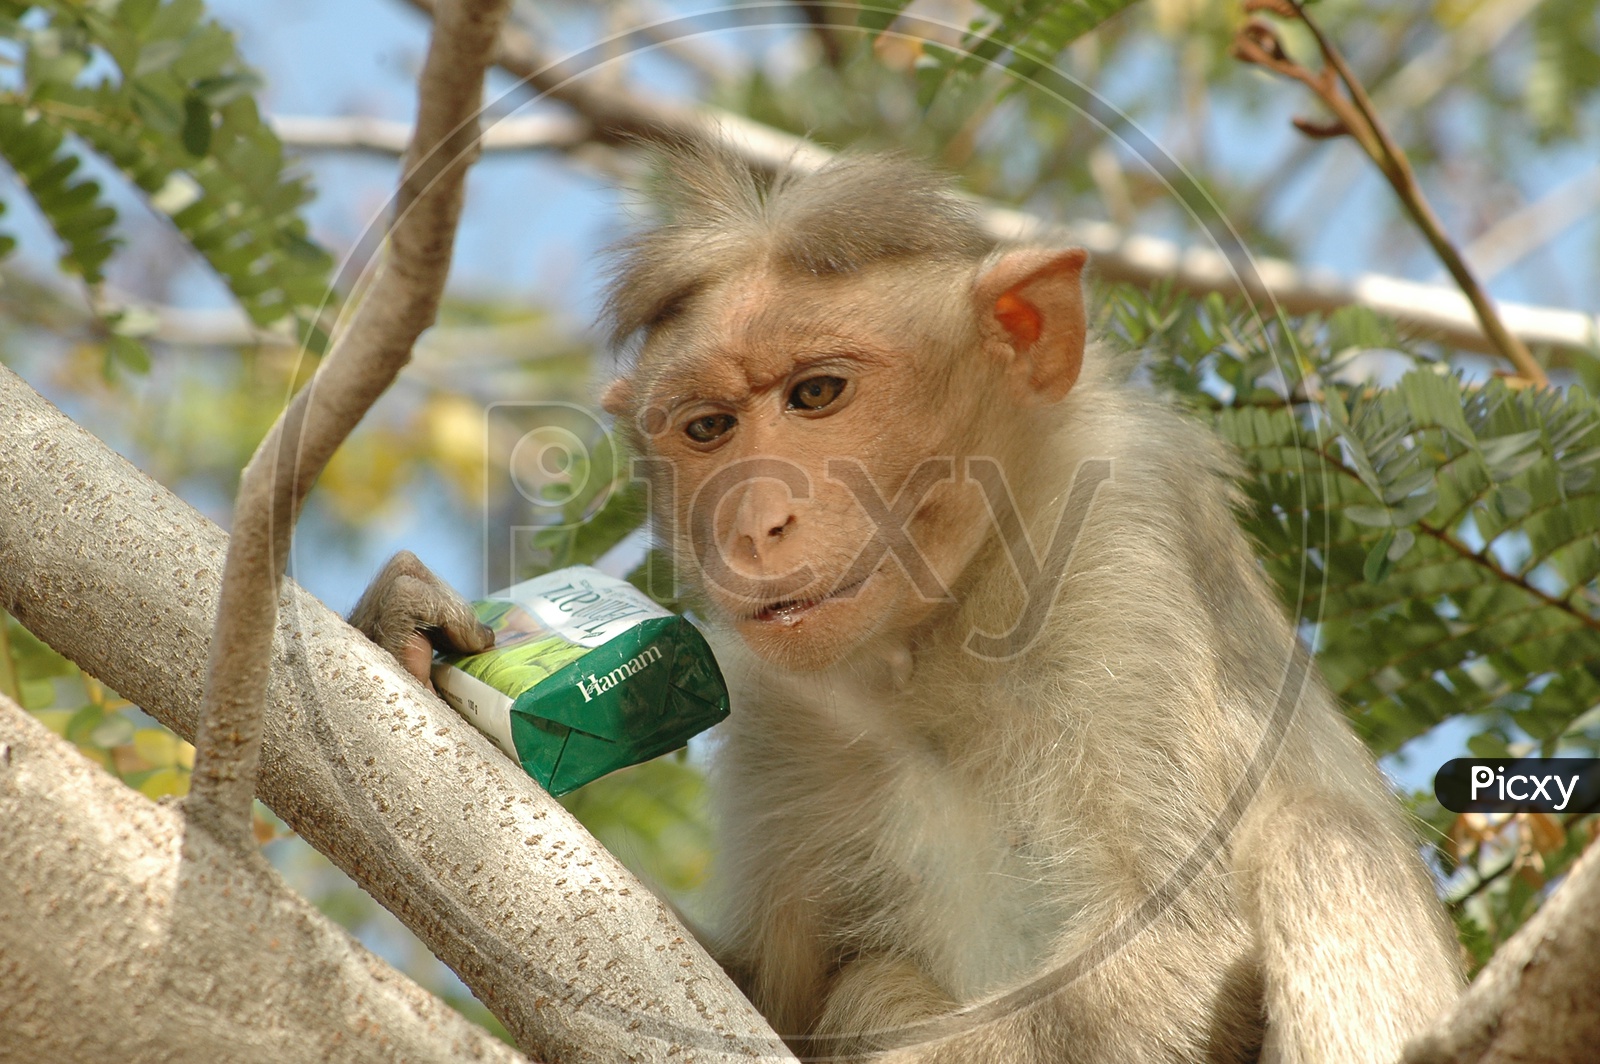 A Young Macaque or Monkey On a Tree with  Hamam Soap in Hands